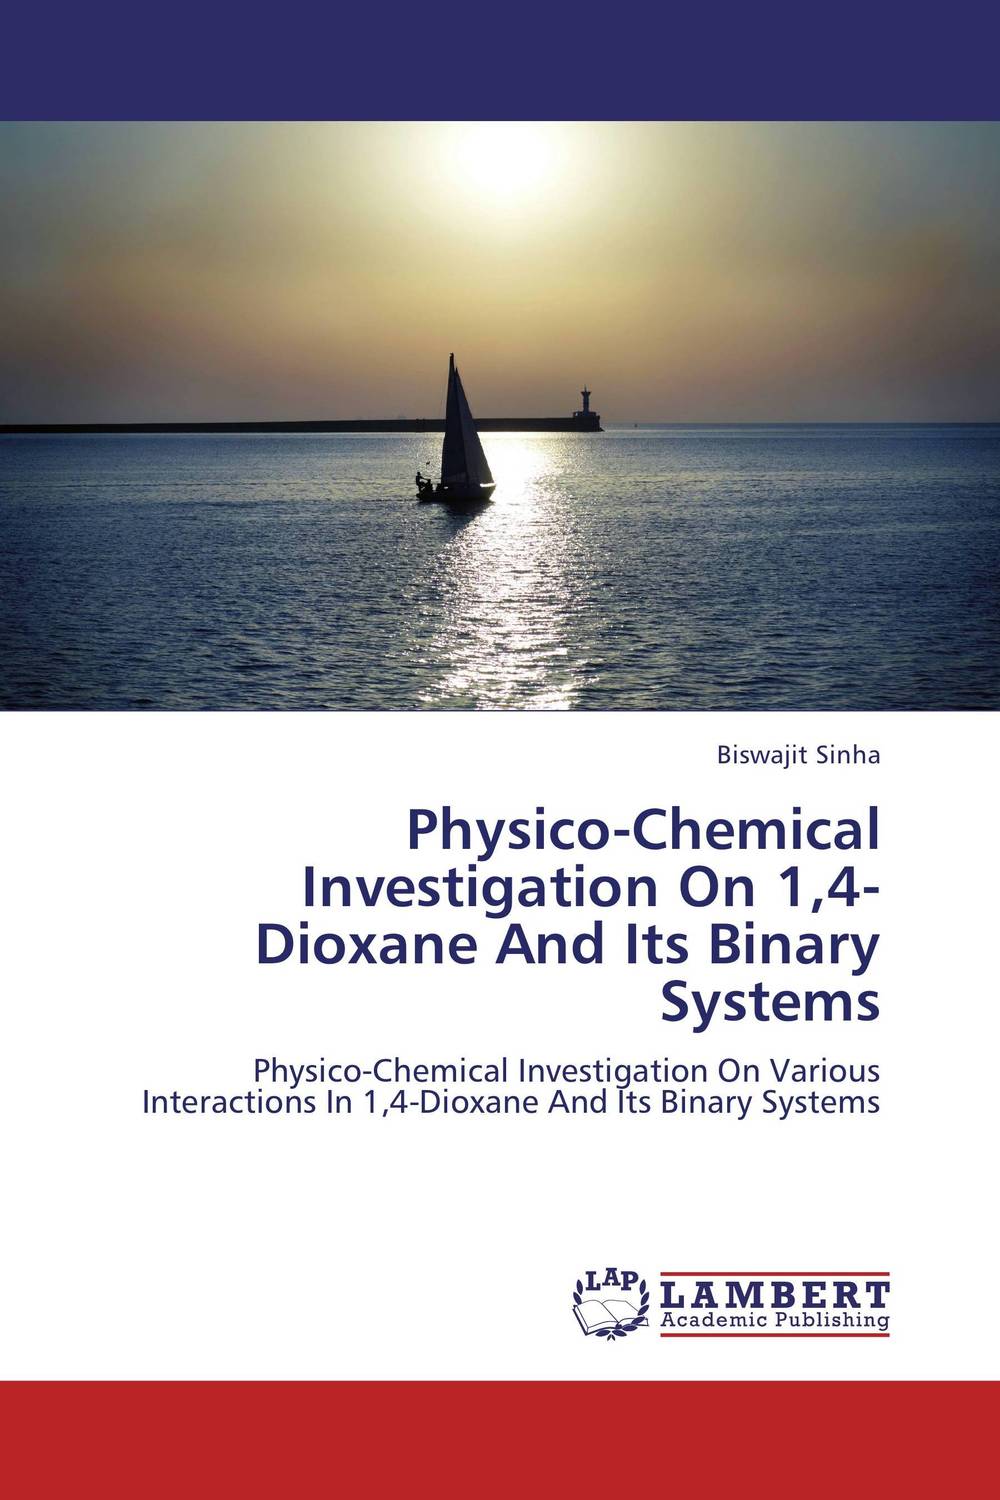 Physico-Chemical Investigation On 1,4-Dioxane And Its Binary Systems